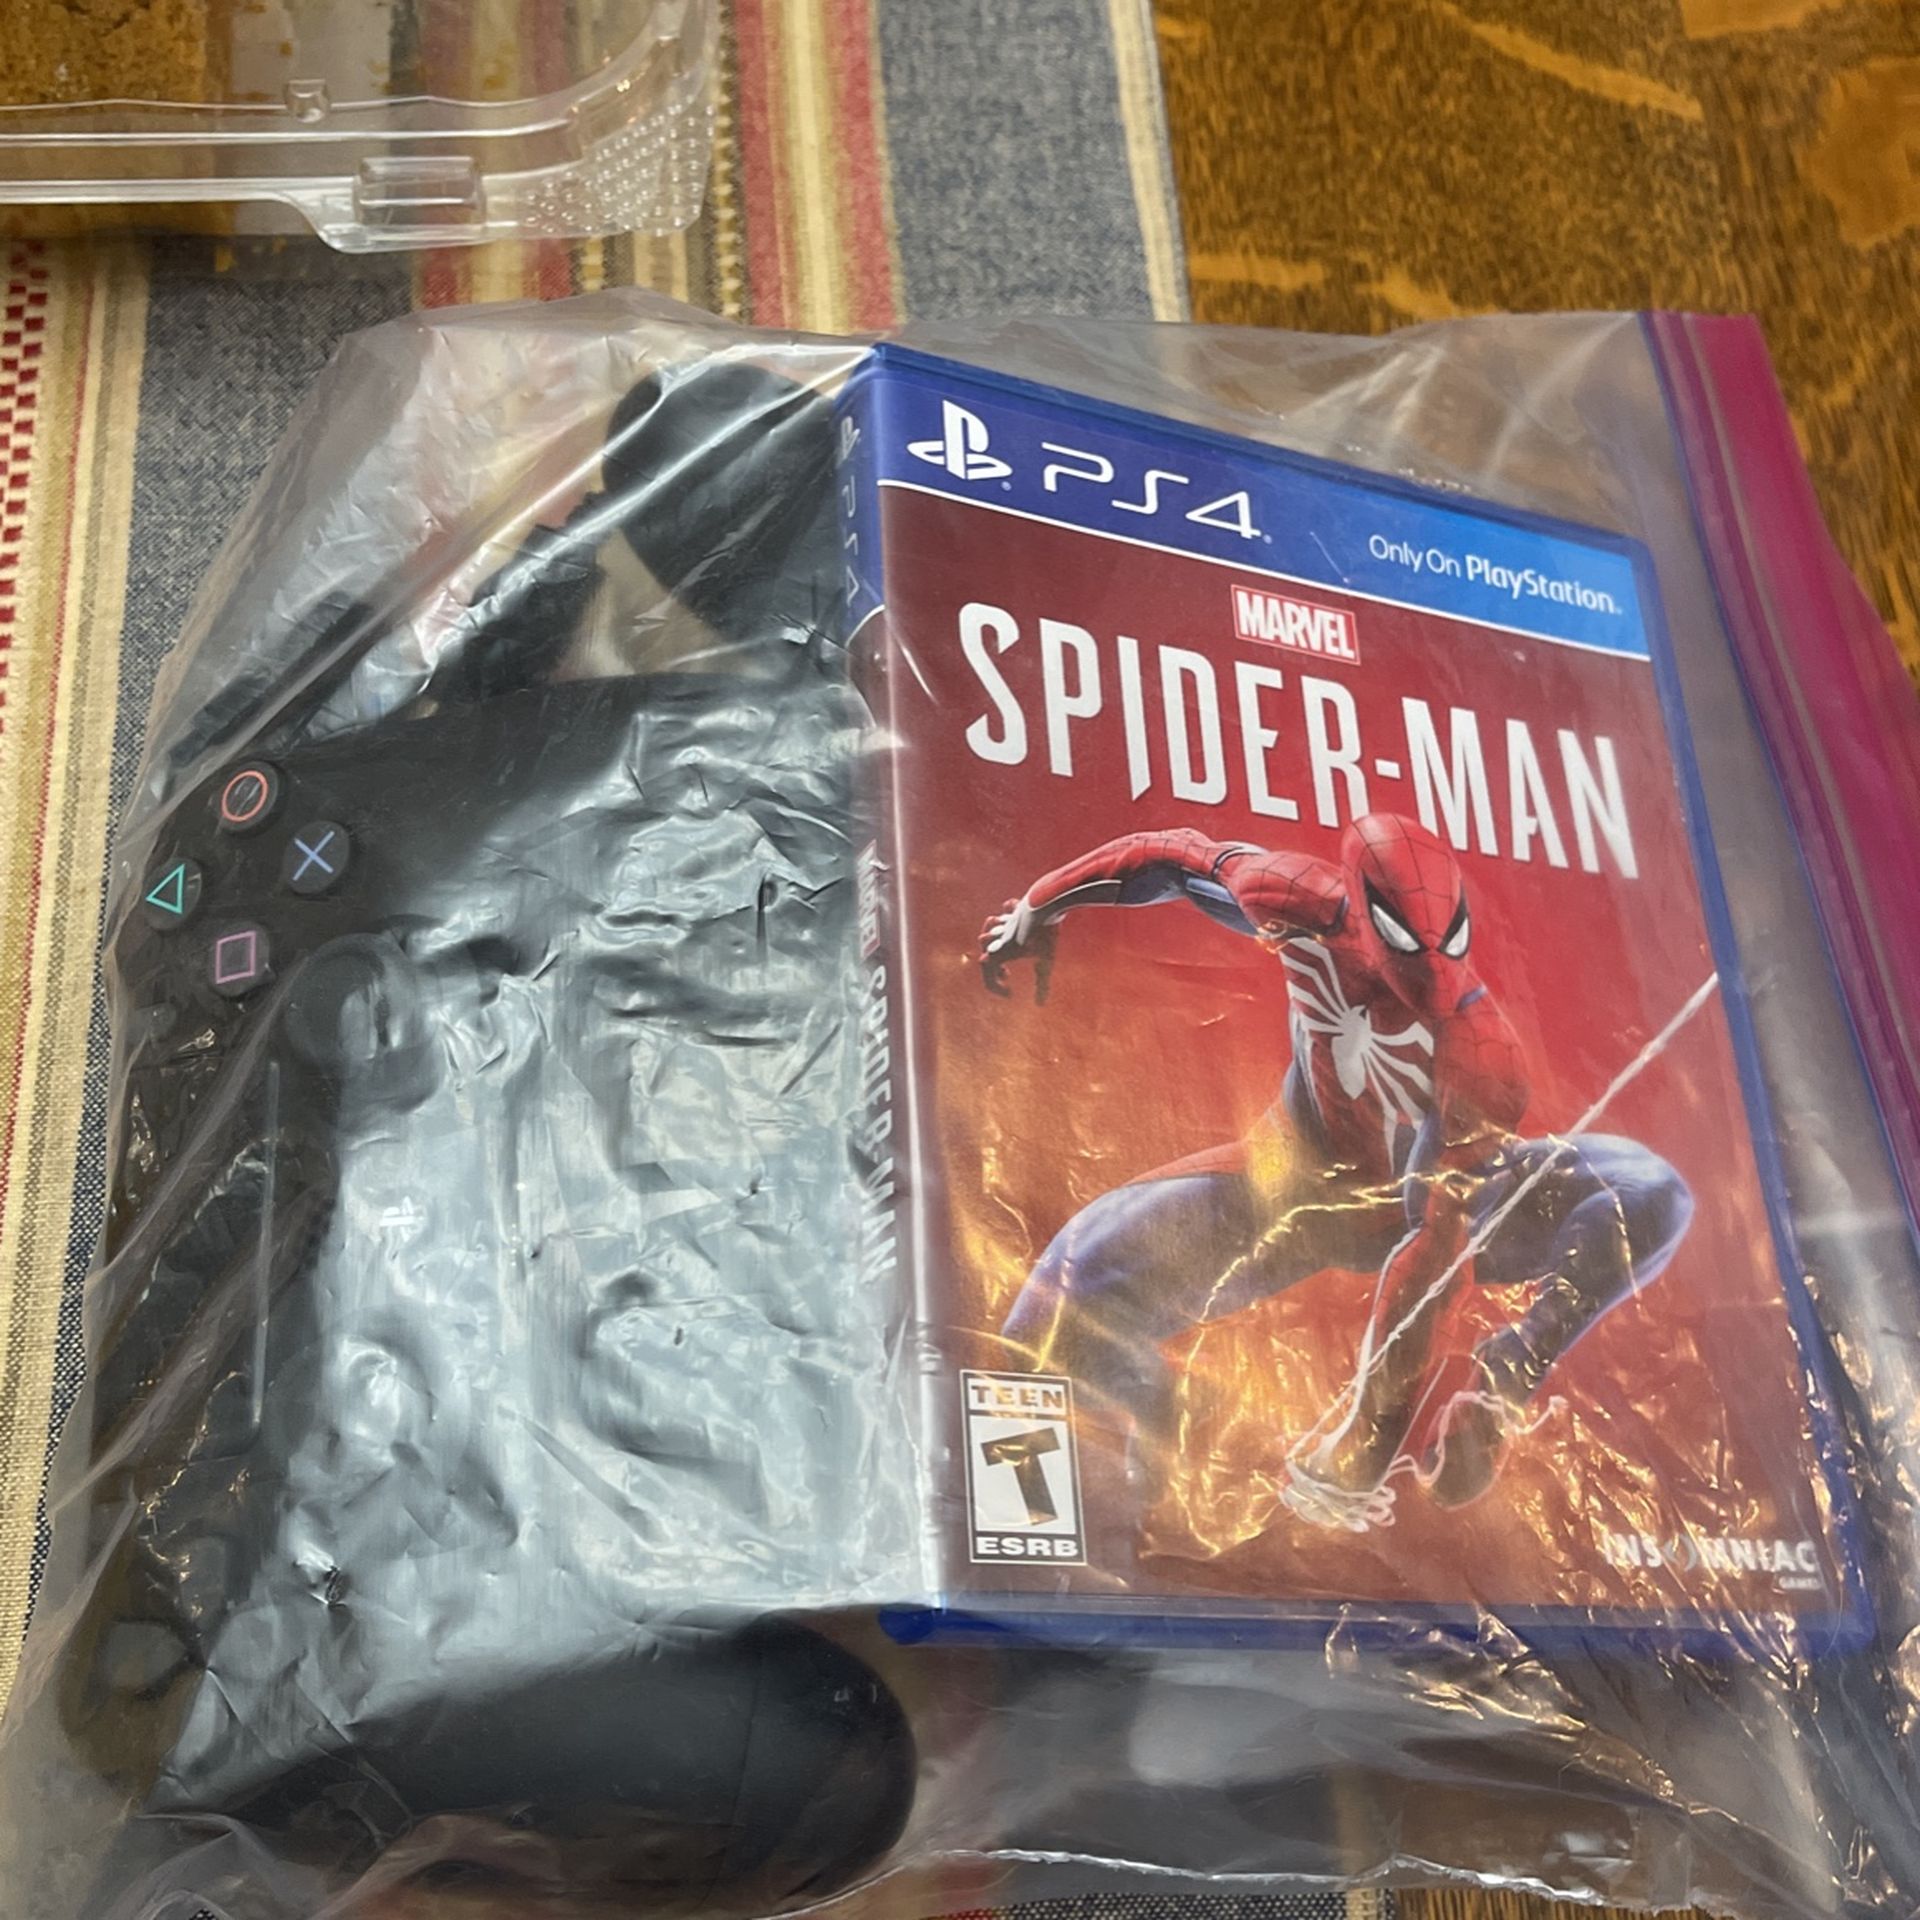 New PS4 Used Once Original Packaging!